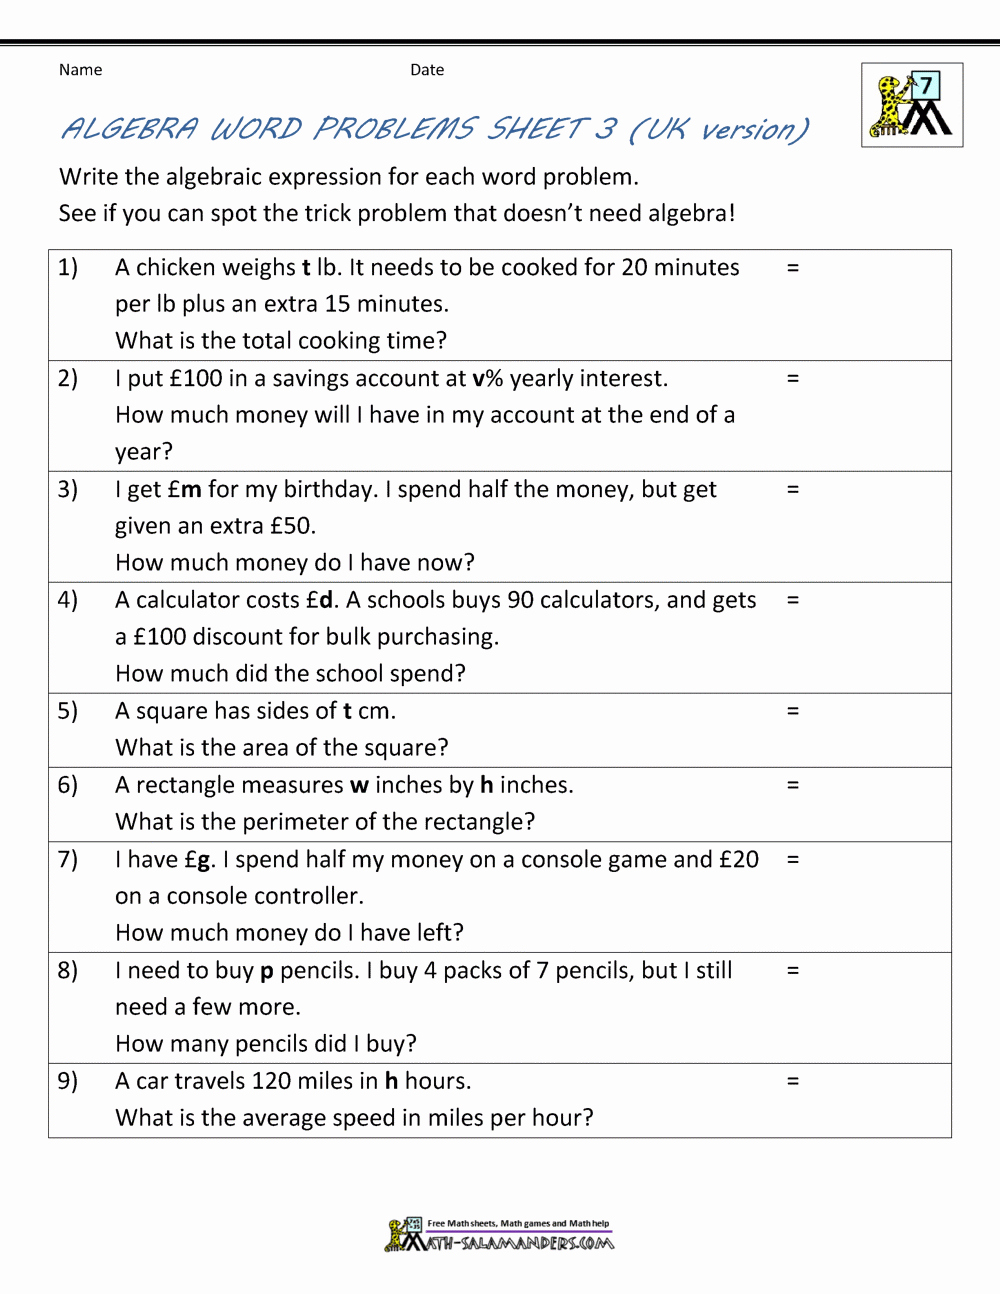 Writing Numerical Expressions Worksheets Fresh Writing Algebraic Expressions Worksheet Pdf — Db Excel